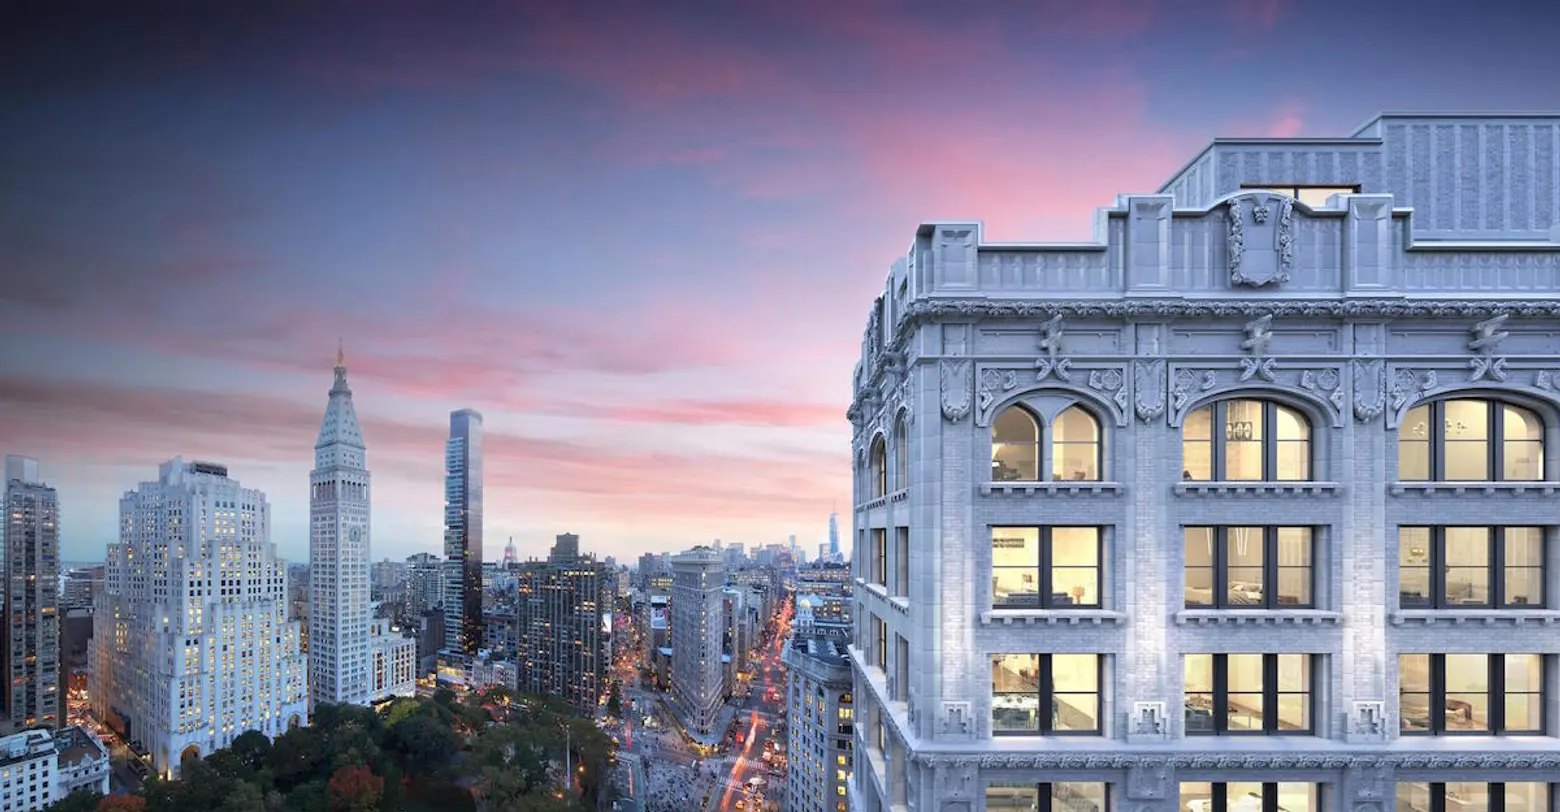 212 fifth avenue, nomad, cool listings, penthouse, triplex, terrace, outdoor space, big ticket